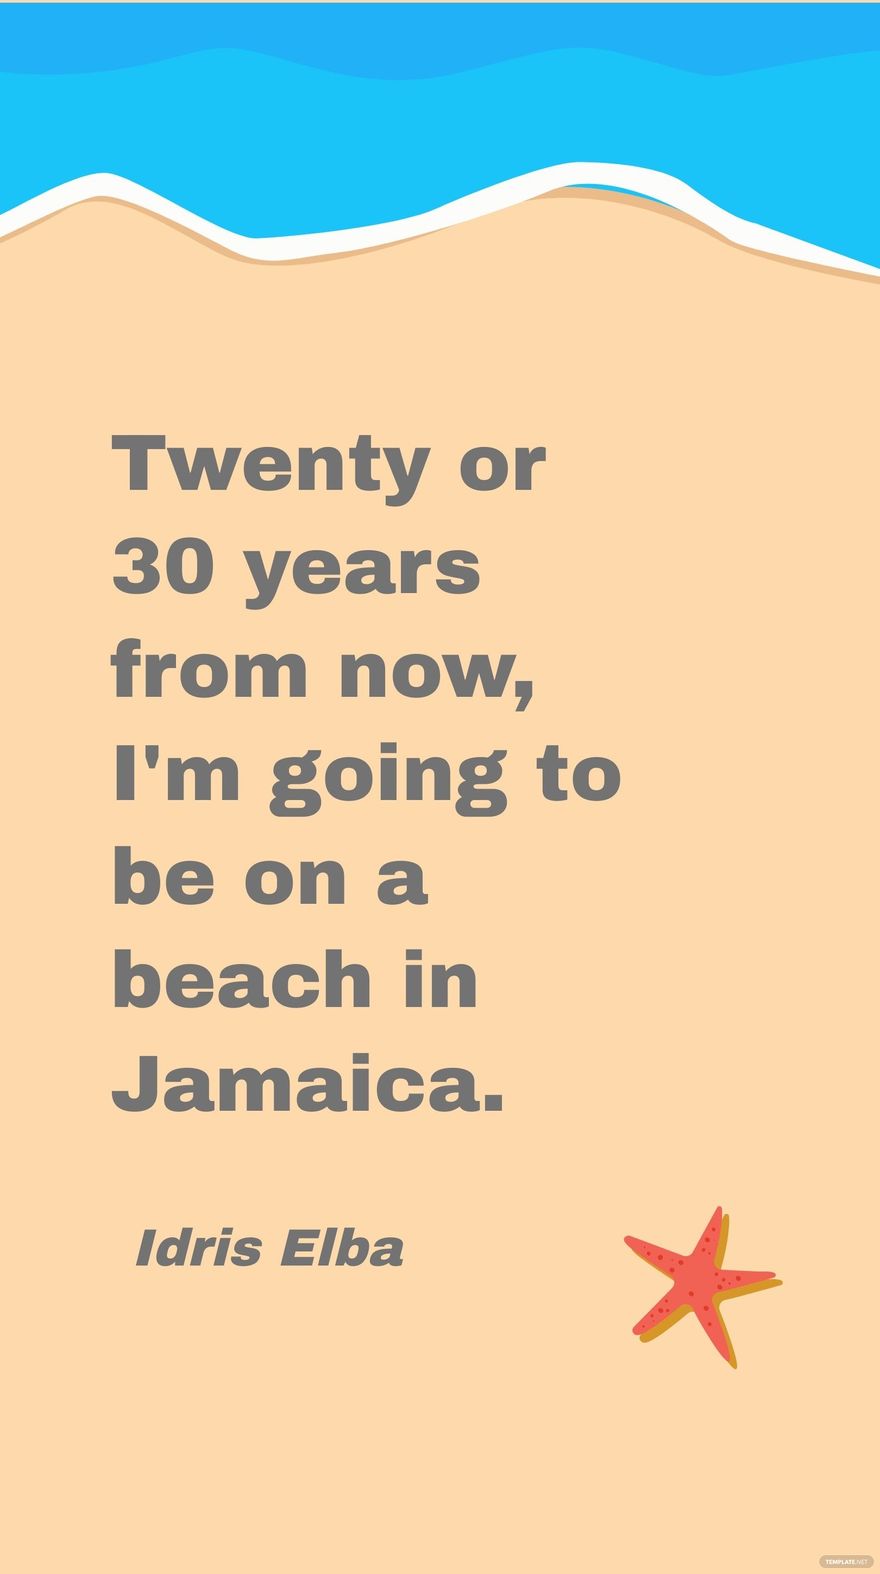 Free Idris Elba - Twenty or 30 years from now, I'm going to be on a beach in Jamaica. in JPG